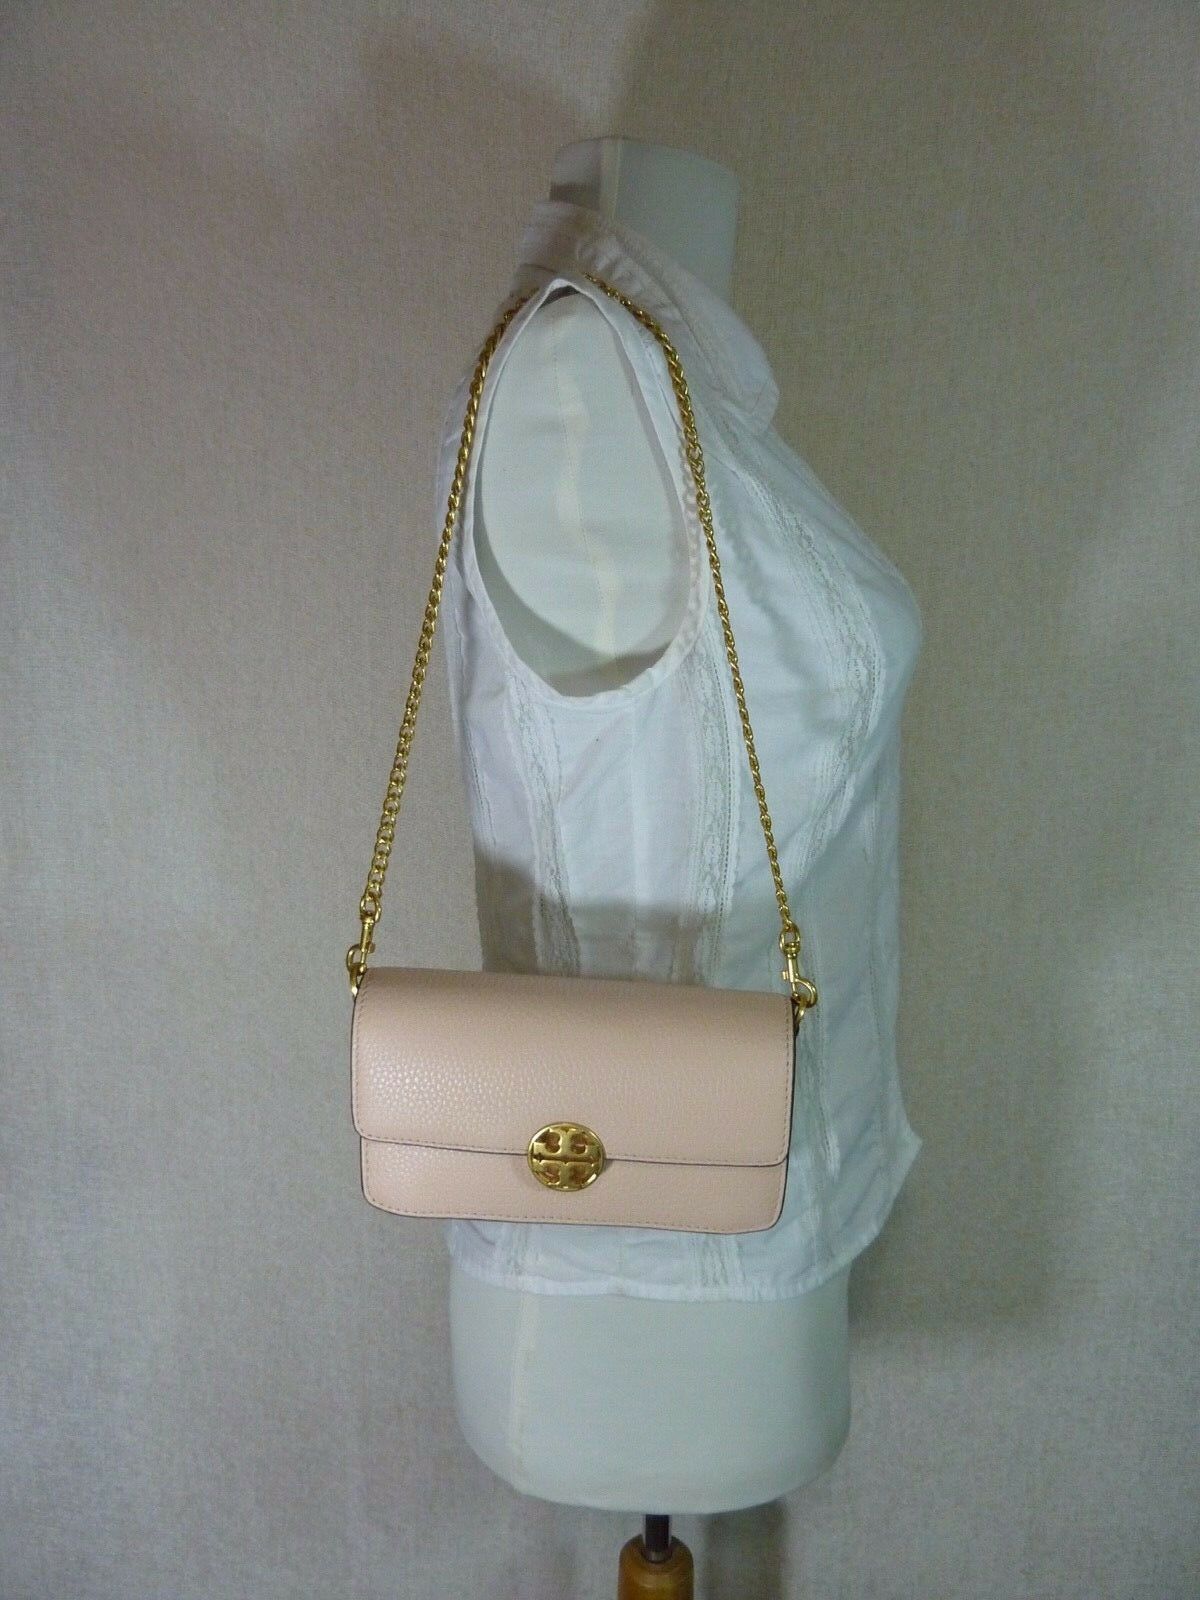 Primary image for NEW Tory Burch Pale Apricot Pink Chelsea Chain Pouch/Mini Bag - $228